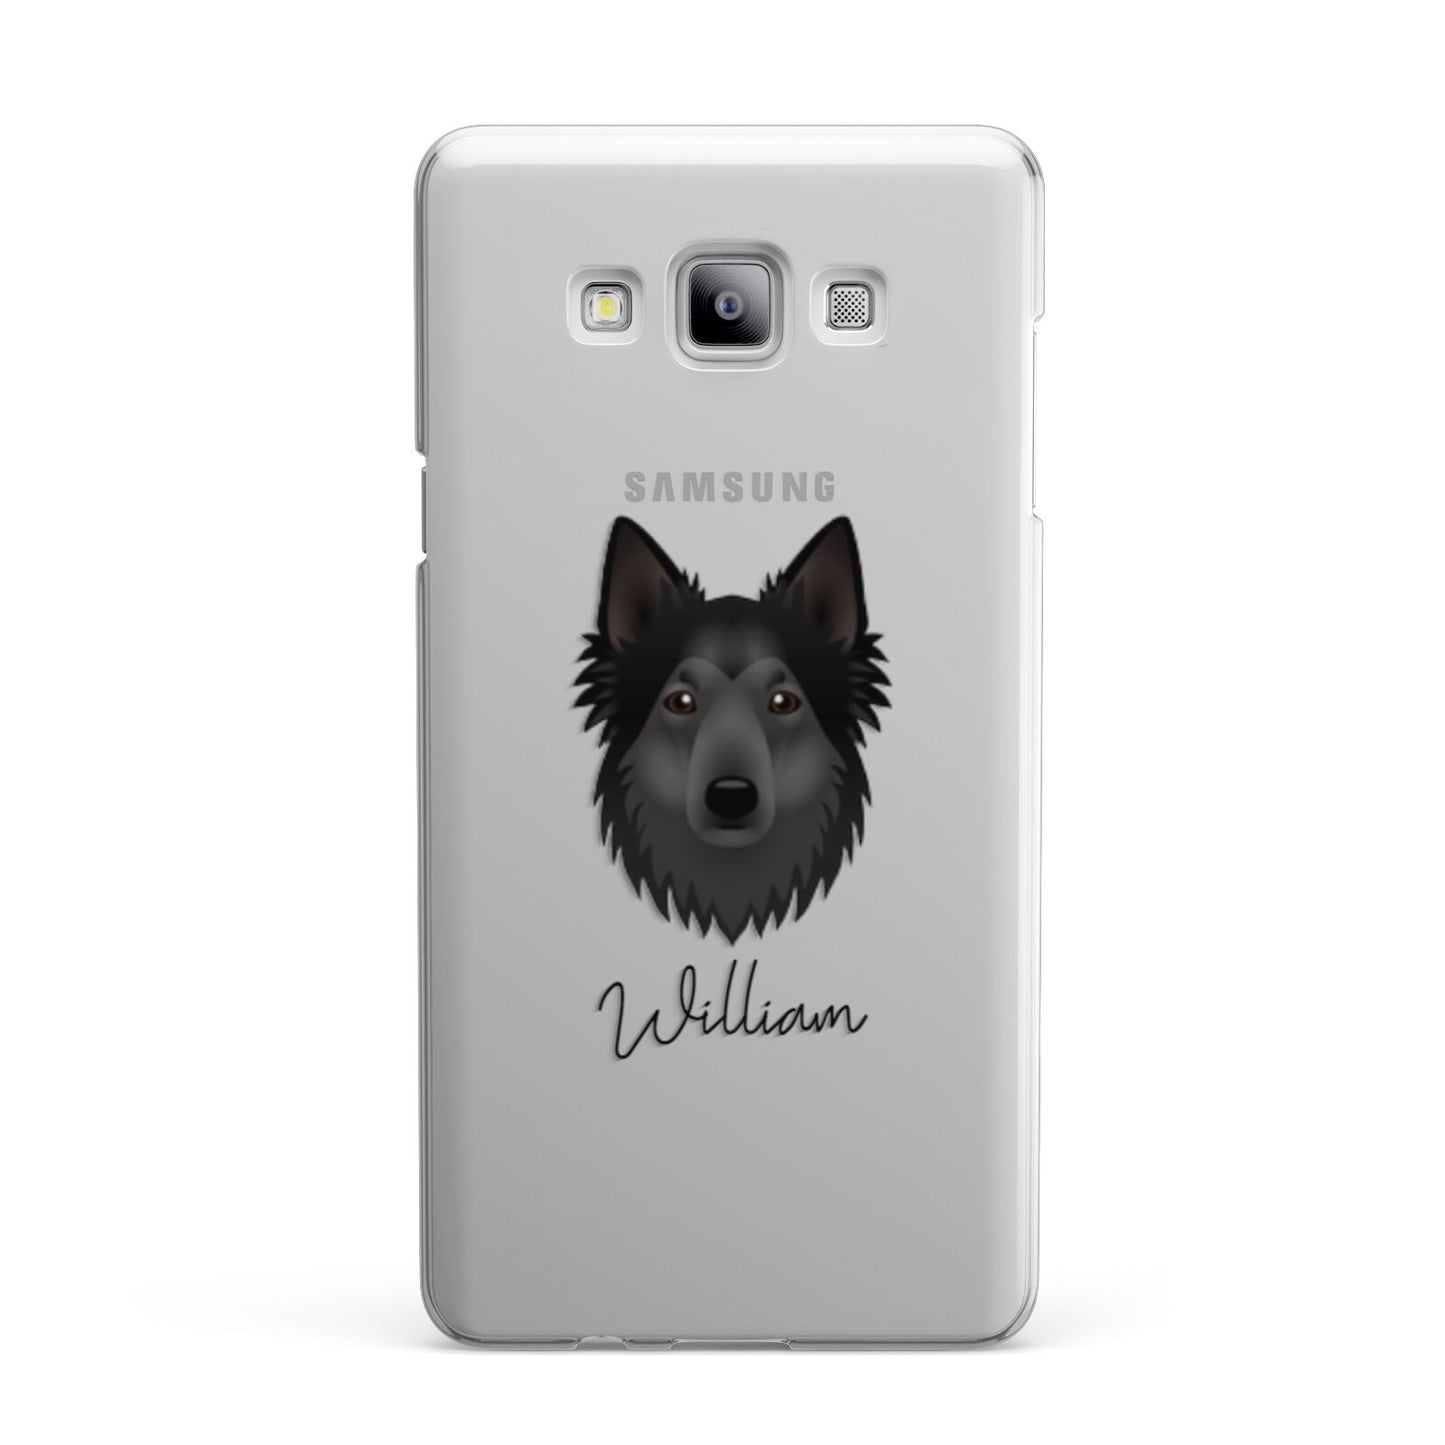 Shollie Personalised Samsung Galaxy A7 2015 Case